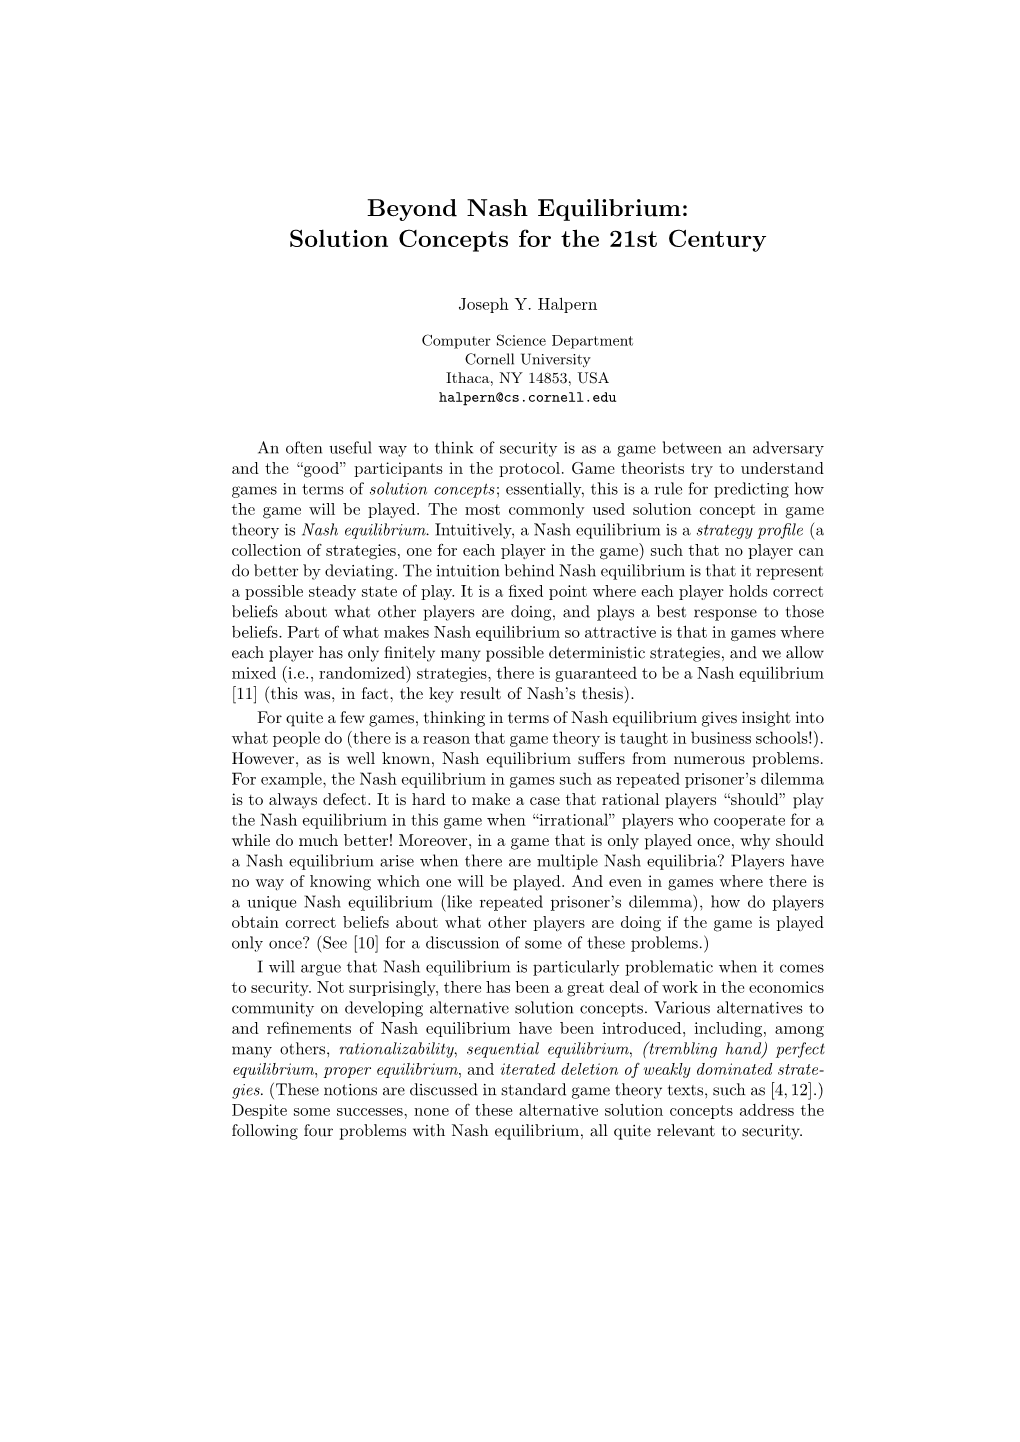 Beyond Nash Equilibrium: Solution Concepts for the 21St Century